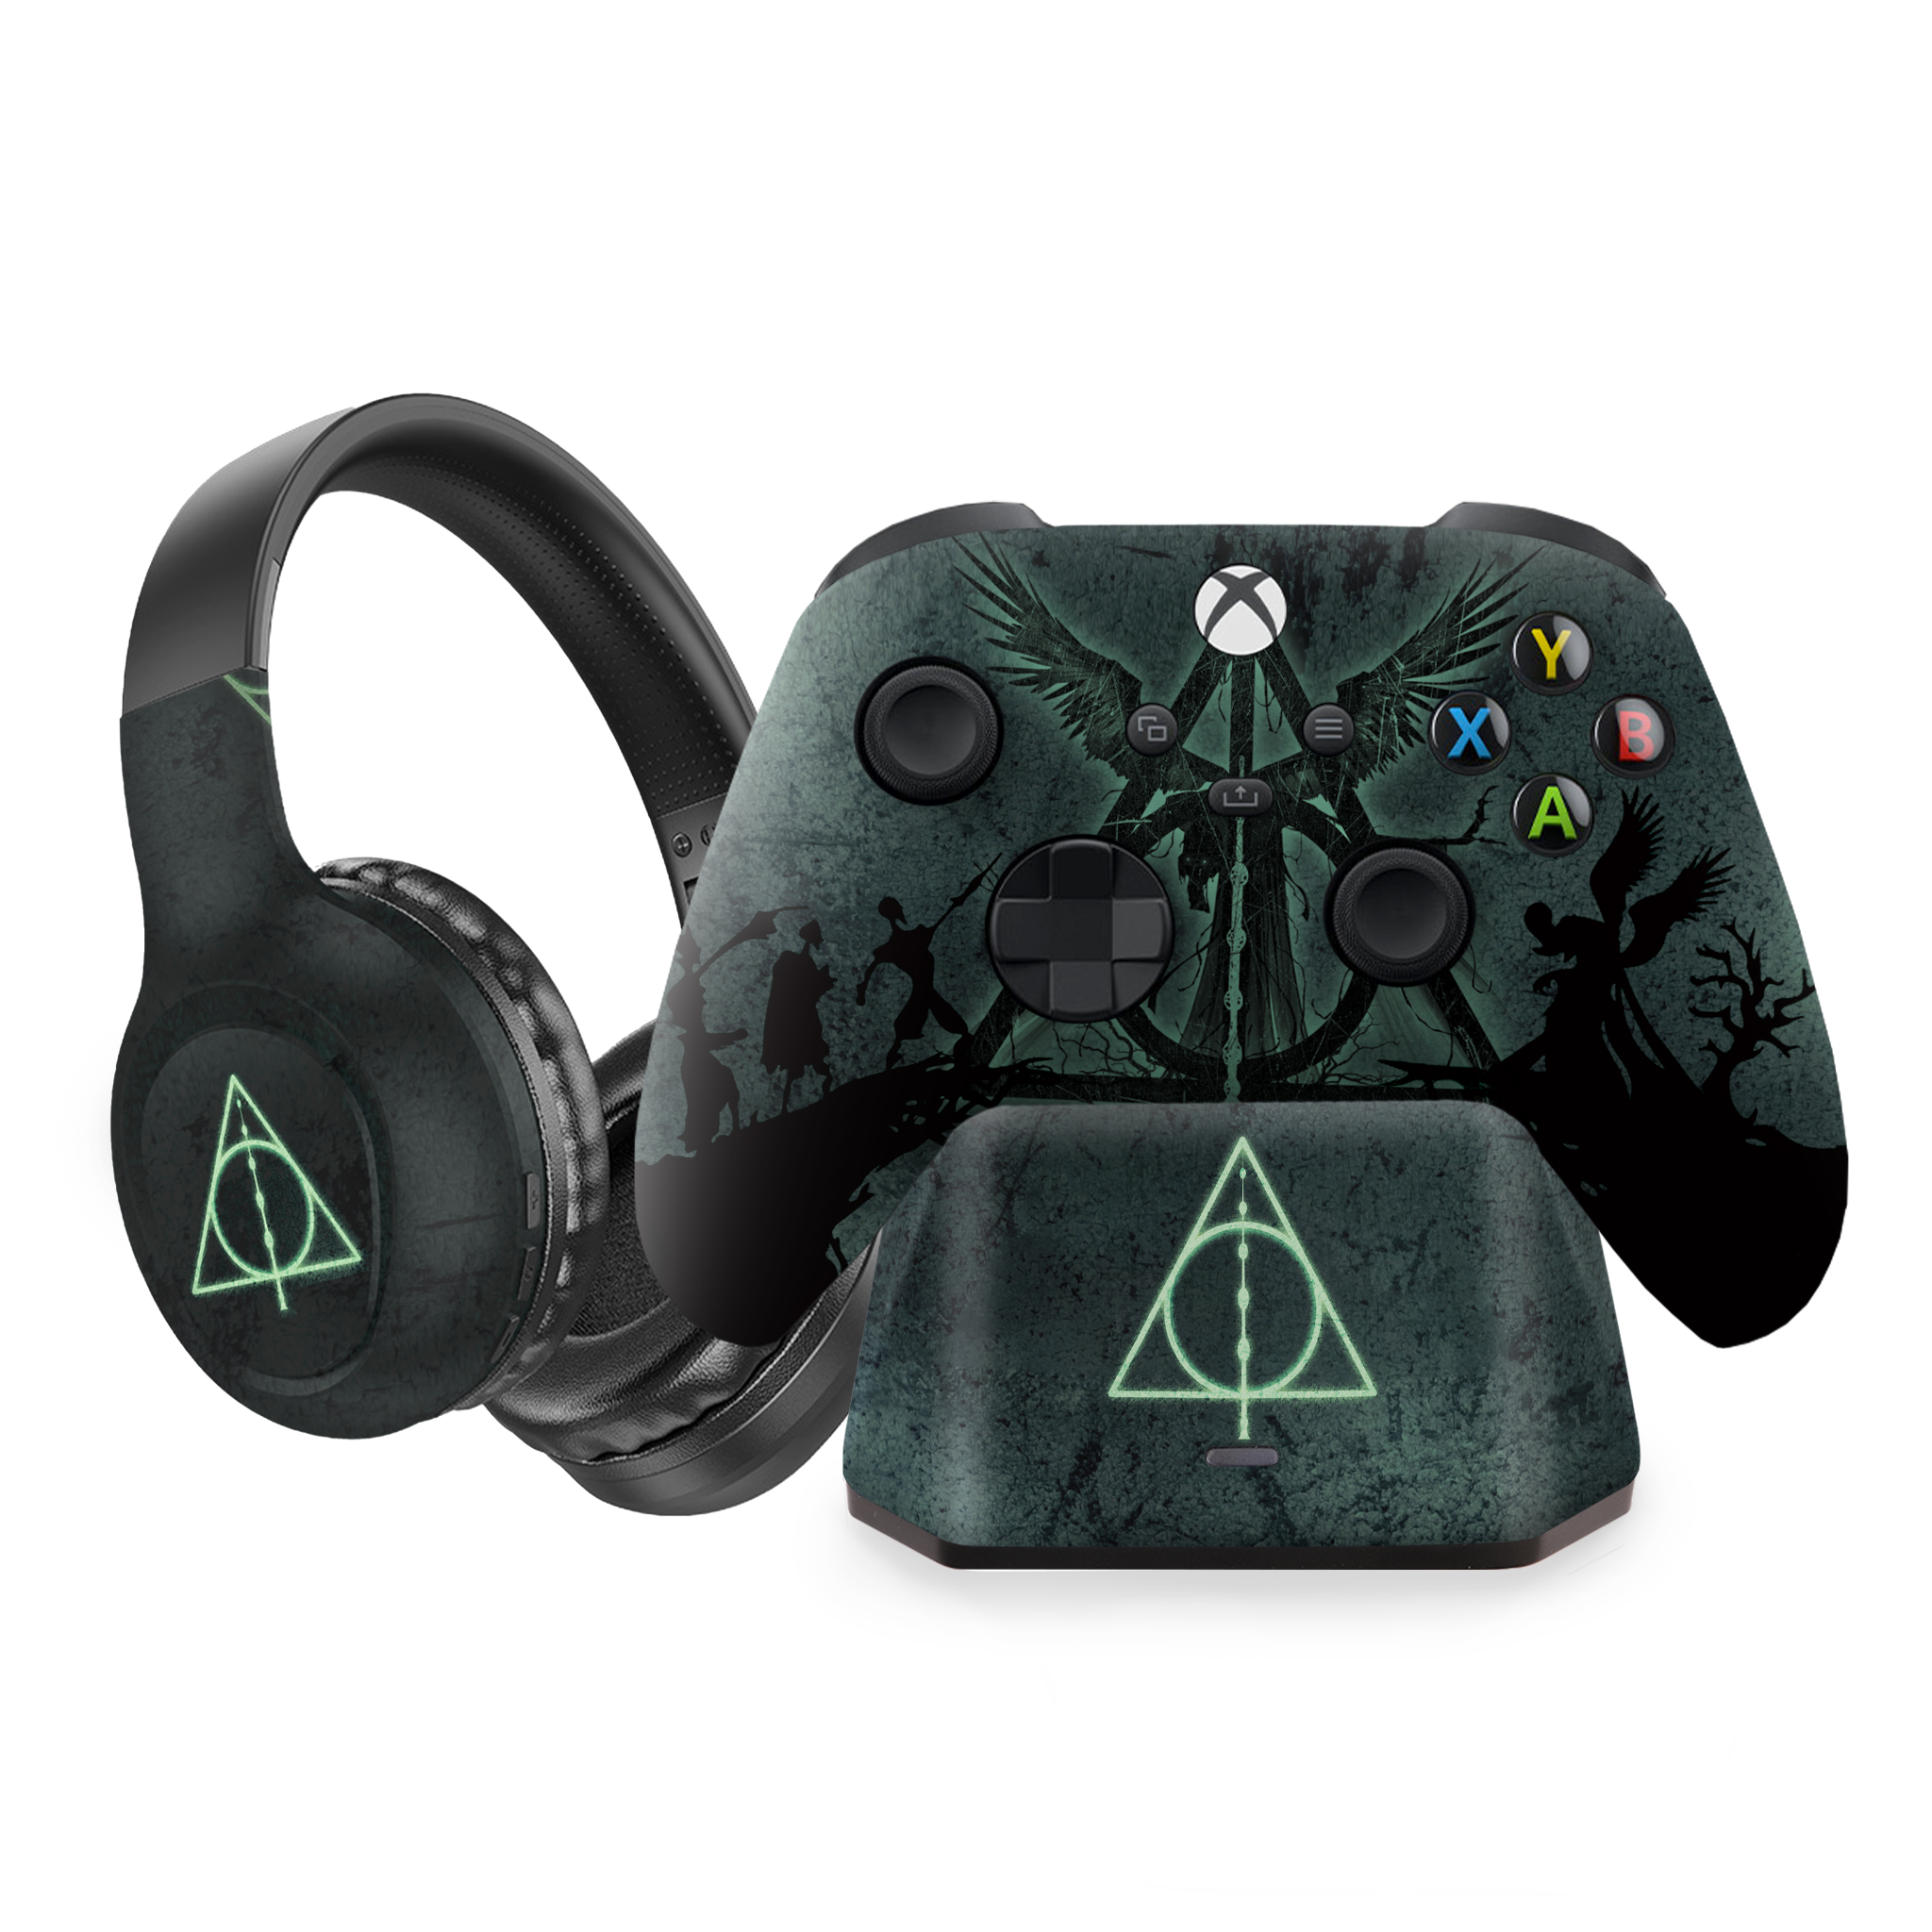 Harry Potter Deathly Hallows inspired Xbox Series X Modded Controller with Charging Station & Headphone